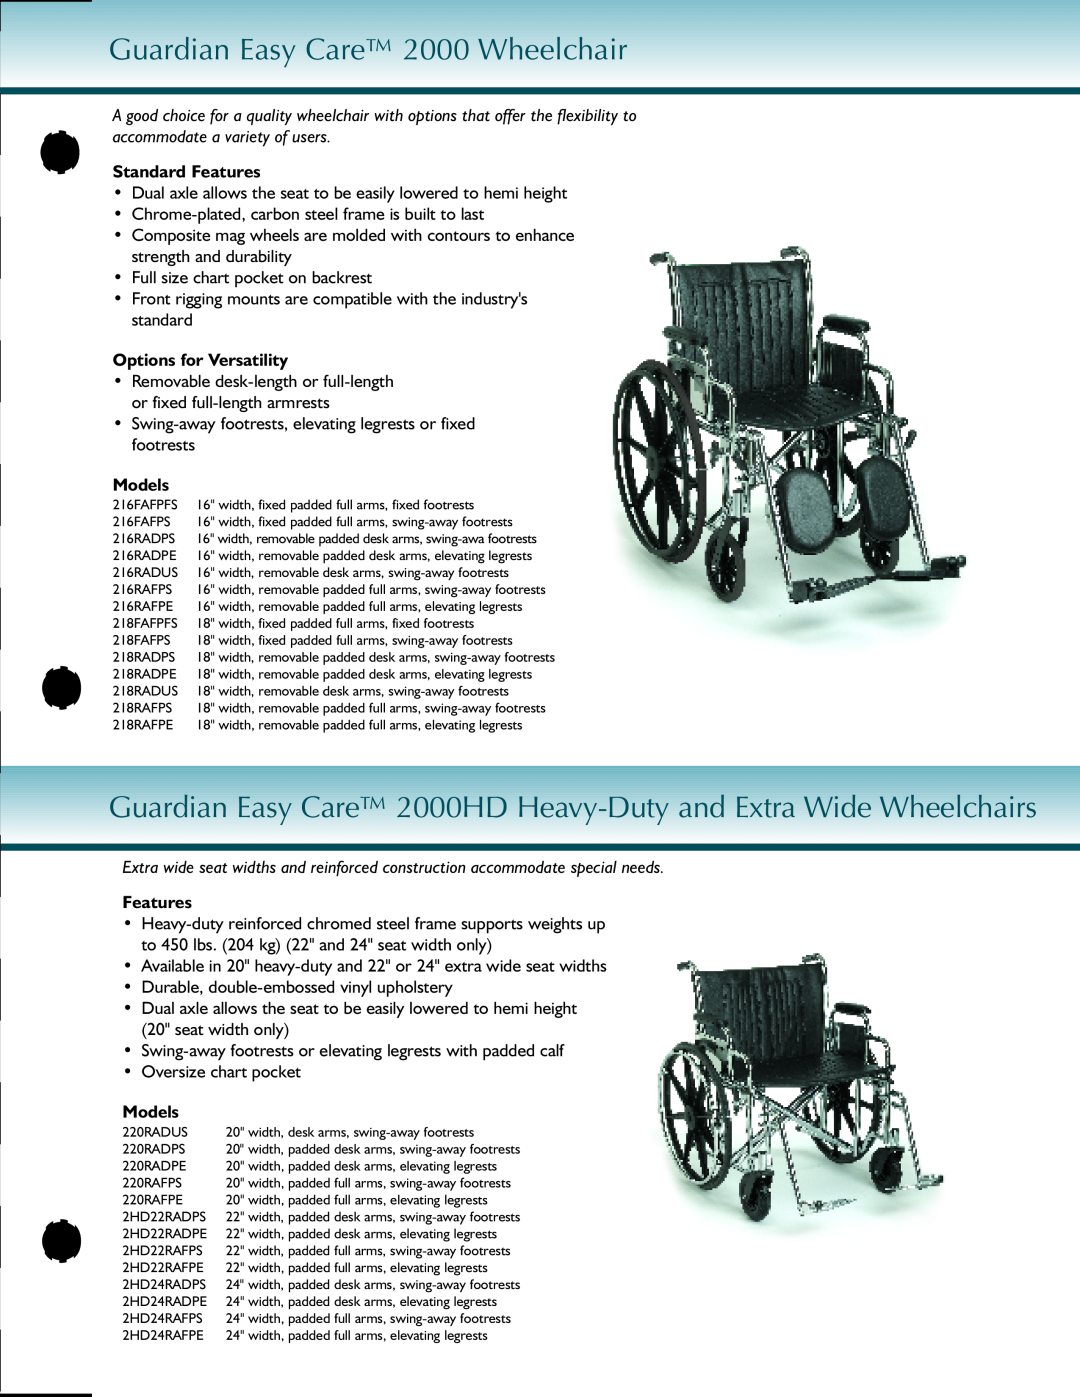 Sunrise Medical Wheelerchair manual Guardian Easy Care 2000 Wheelchair, Standard Features, Options for Versatility, Models 